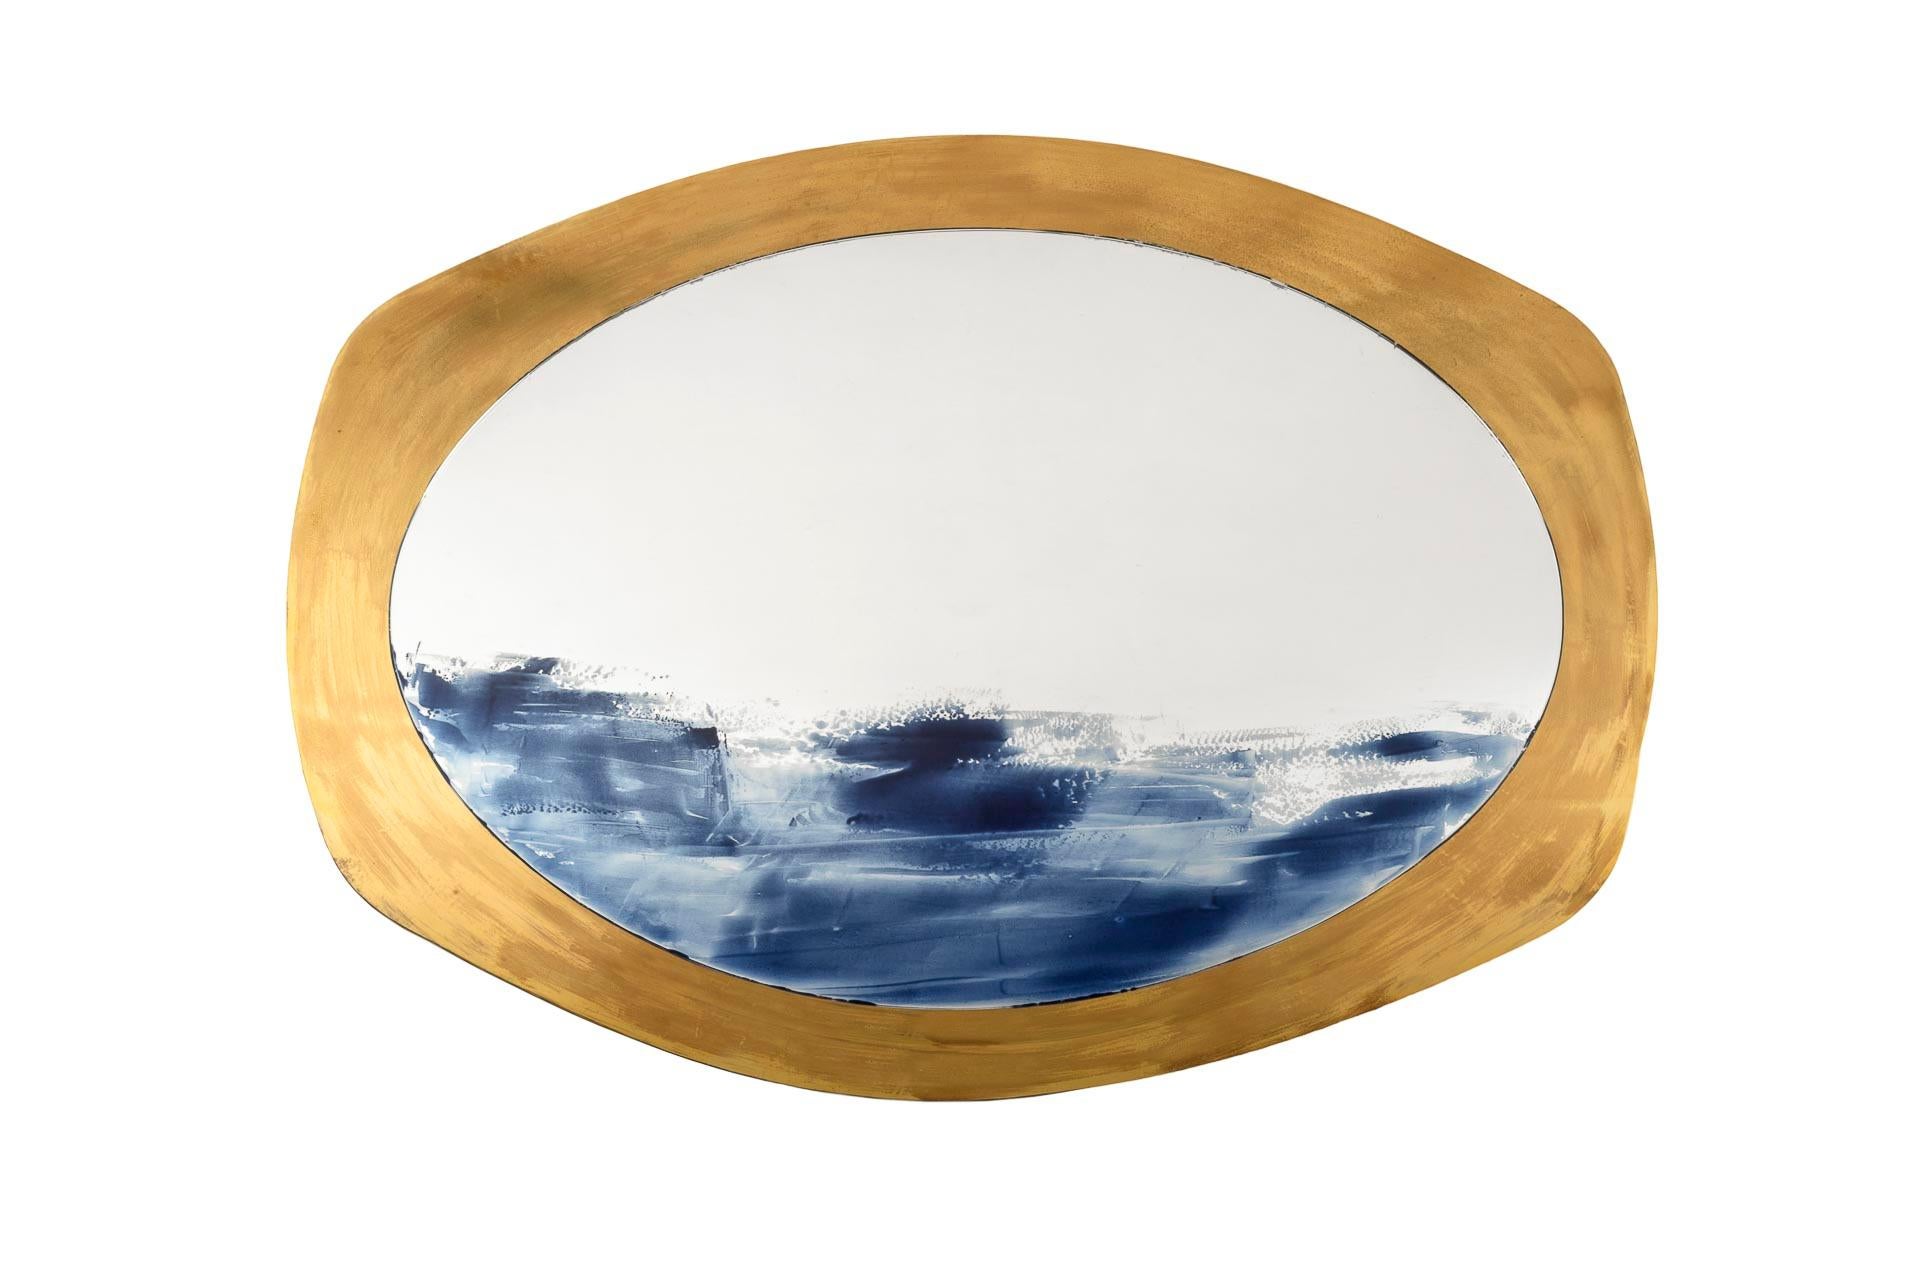 This mirror composition is the result of two-dimensional shapes arranged in two different layers. front sheet: ultra white low iron 5 mm float glass, edge polished, hand-painted with hand-brushed blue ceramic enamels melted on the surface during the